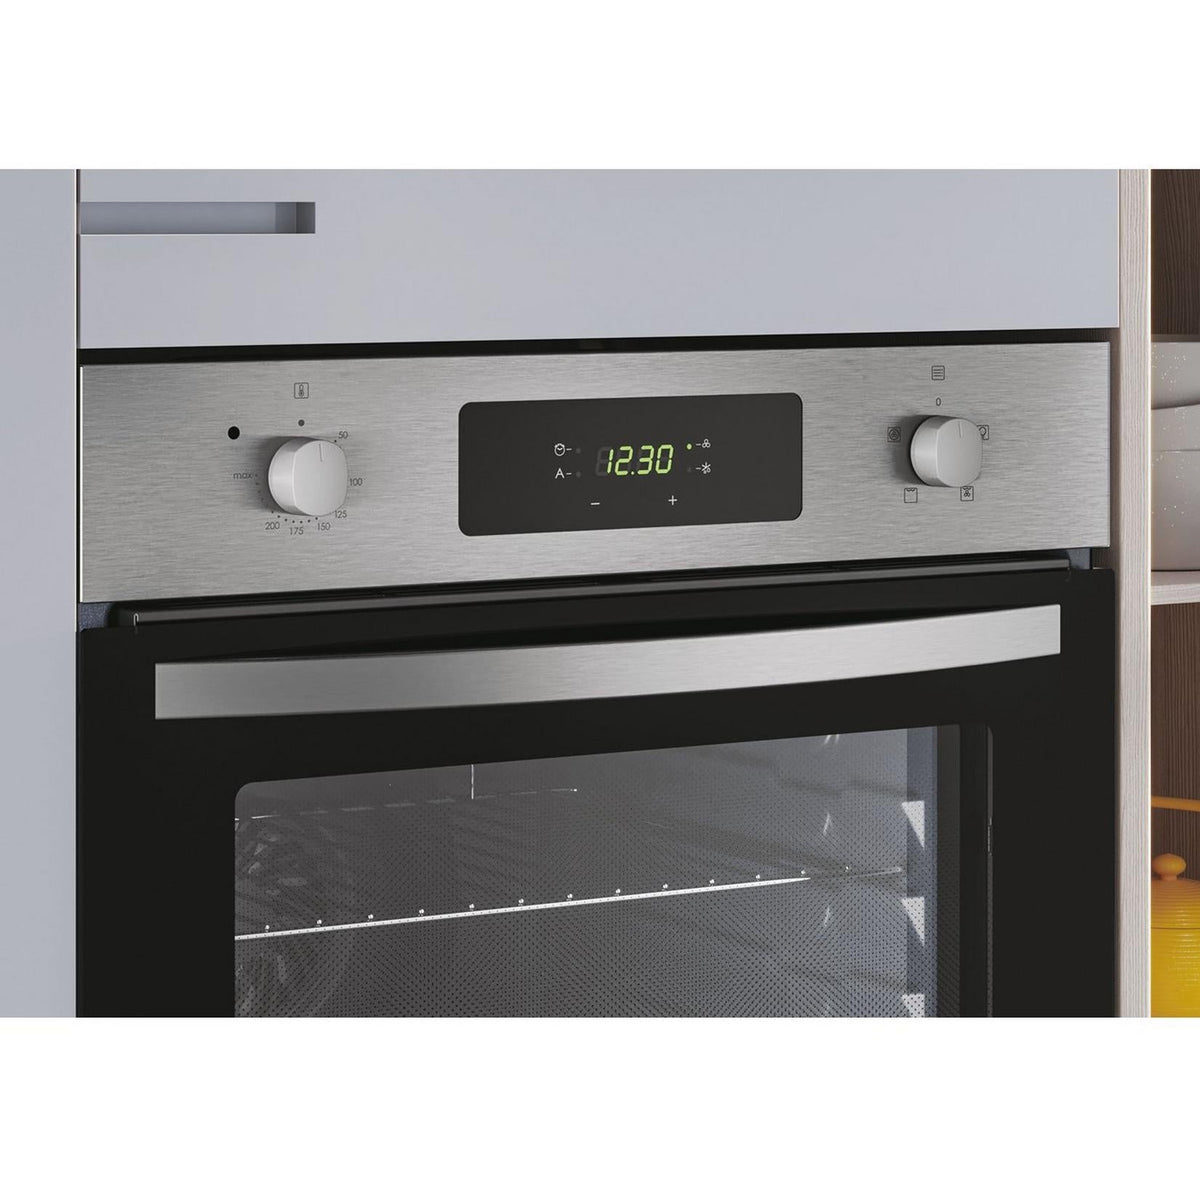 Candy 65L Built-In Electric Single Oven - Stainless Steel | FIDCX405 from Candy - DID Electrical